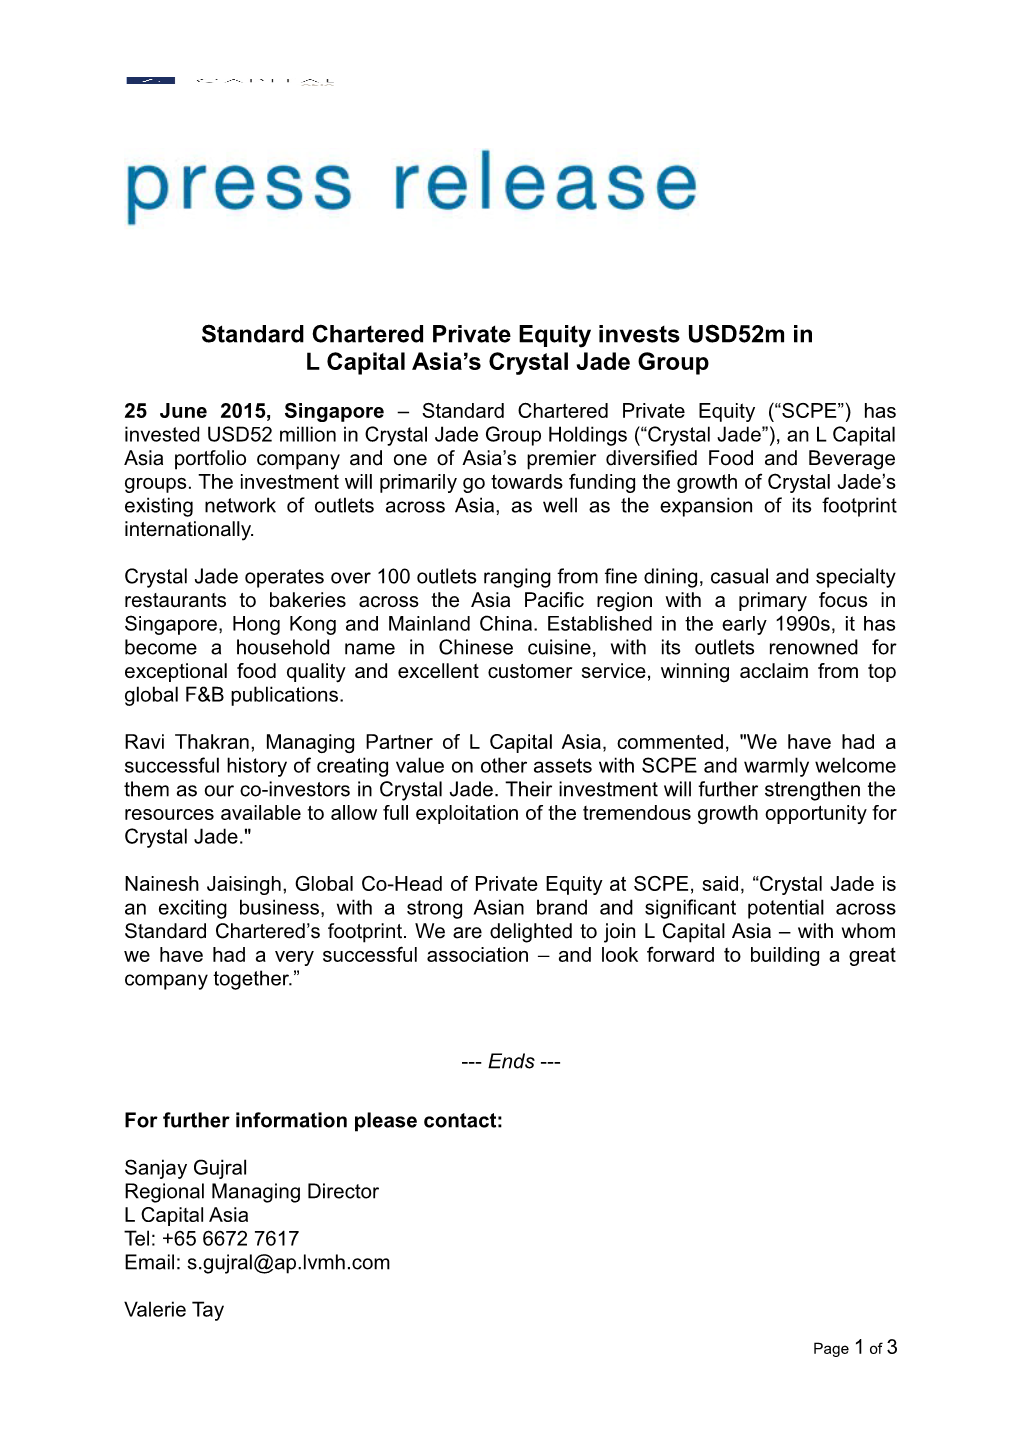 Standard Chartered Private Equity Invests Usd52m In